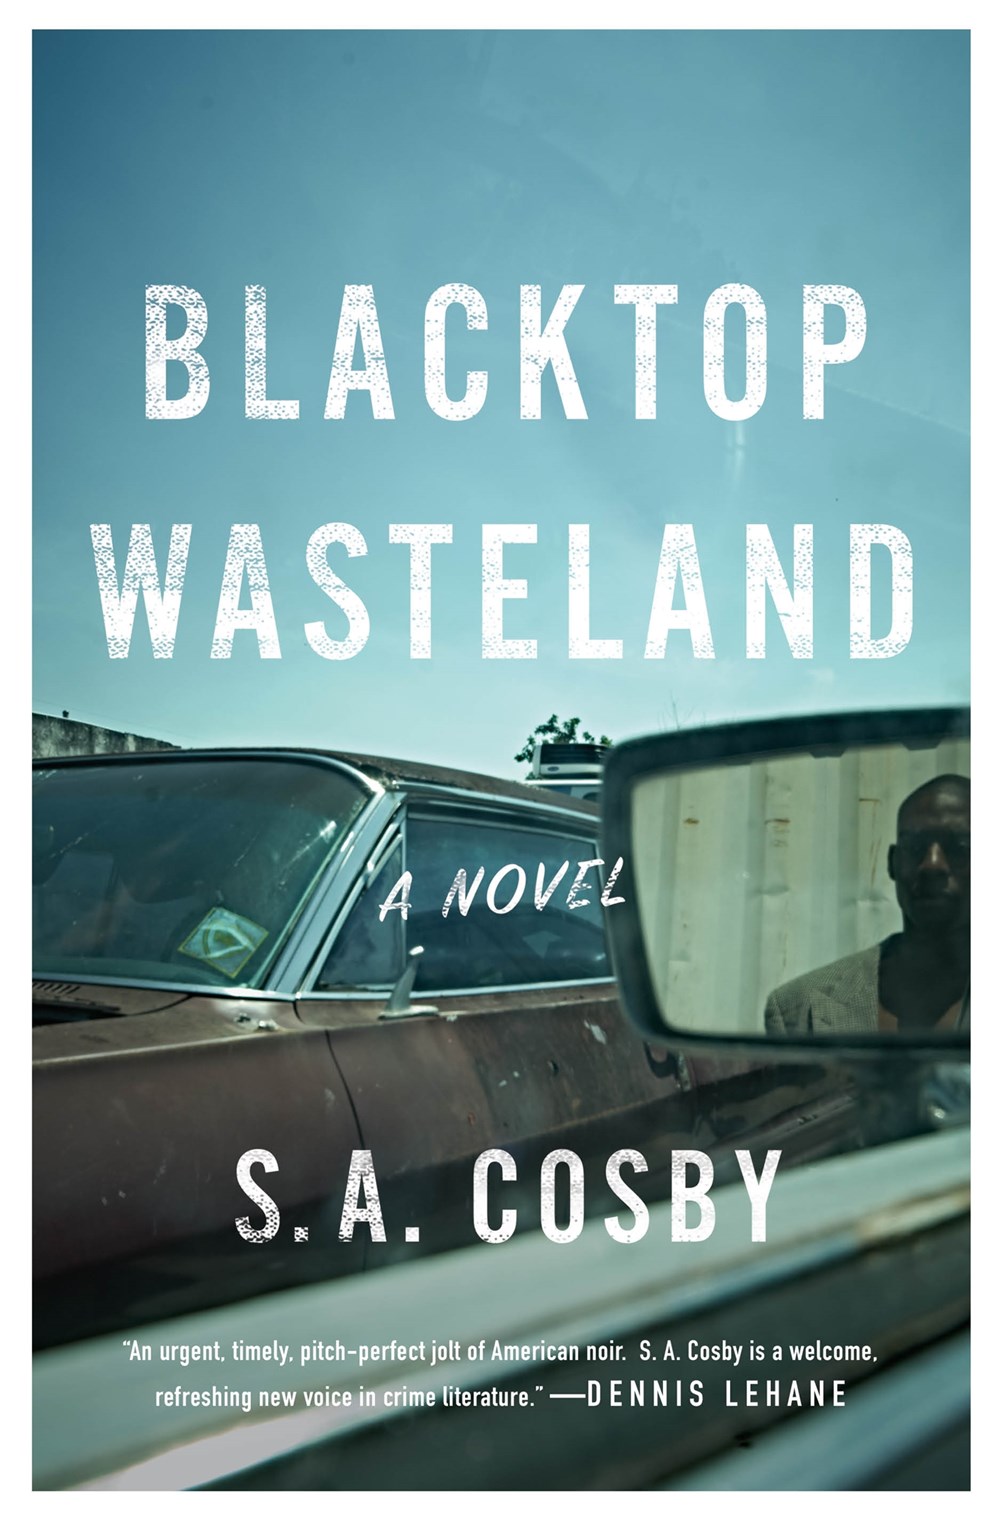 S.A. Cosby's 'Blacktop Wasteland' Wins  Anthony Award | Book Pulse